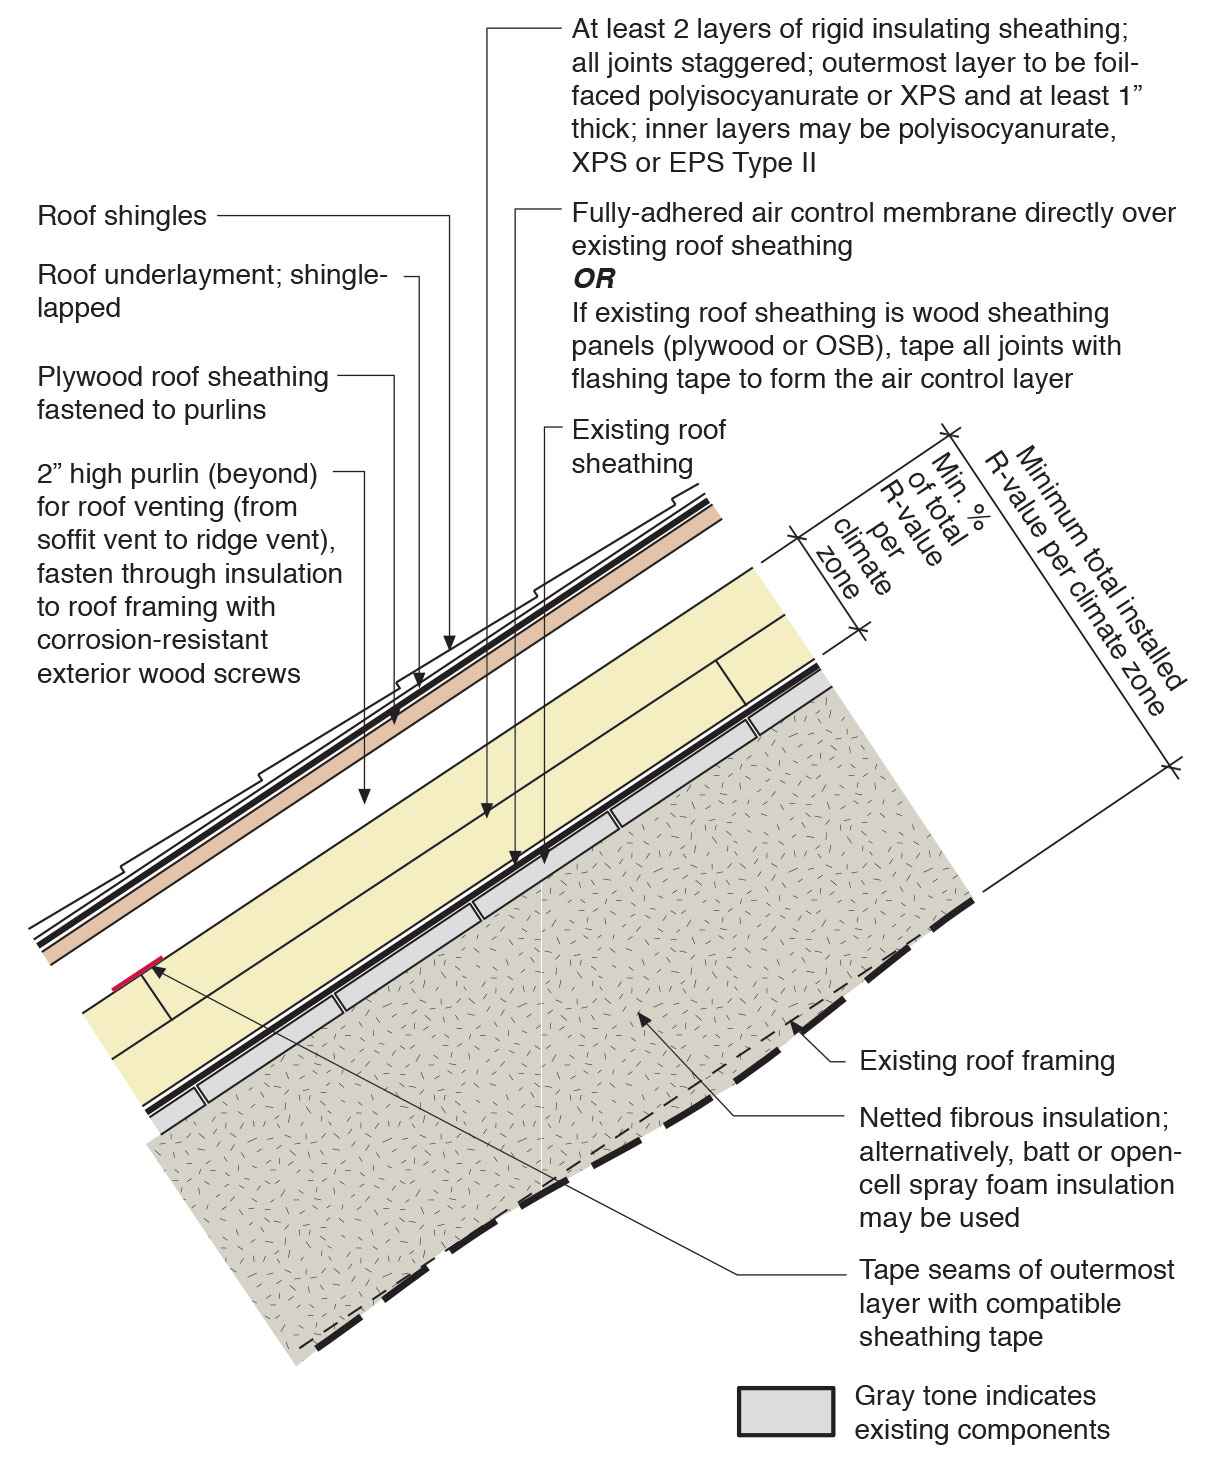 Retrofit an existing roof by installing rigid foam above the roof deck with a ventilation space between the rigid foam and the new roof sheathing plus new moisture and air control layers and cavity insulation in the roof rafters